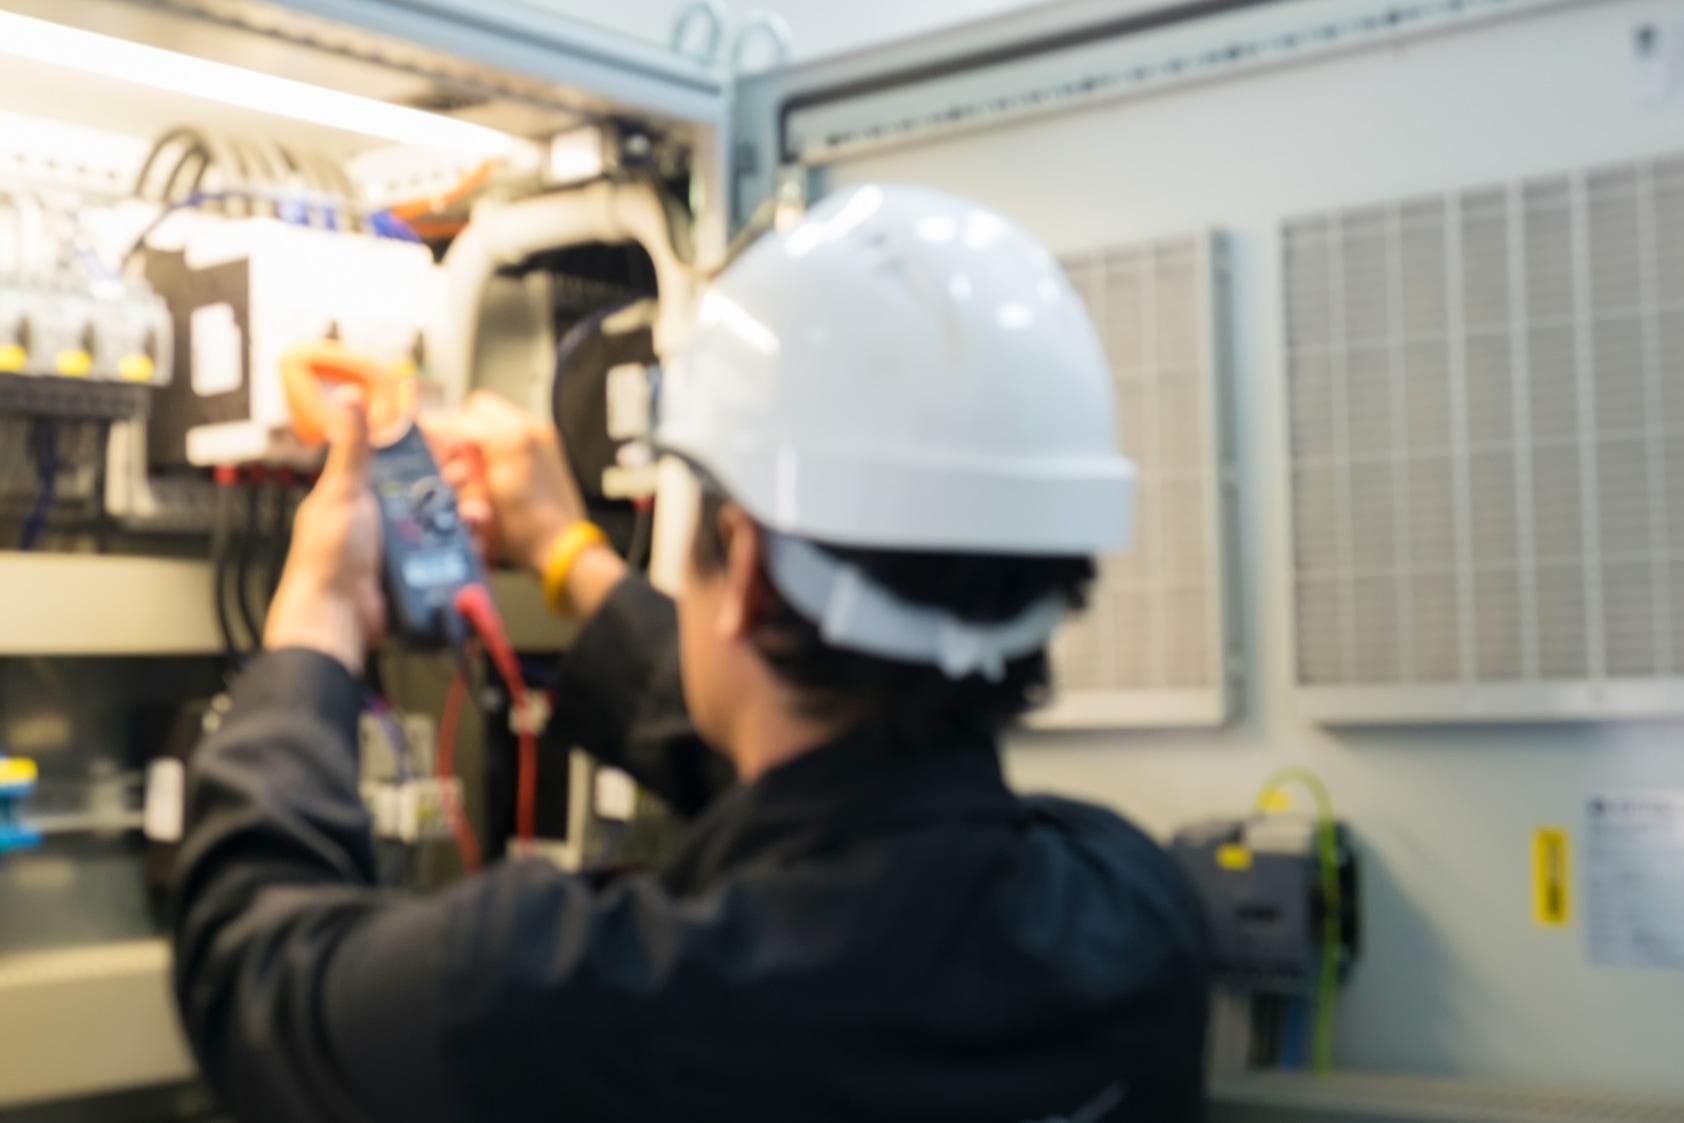 Licensed Electrician in Beaumont